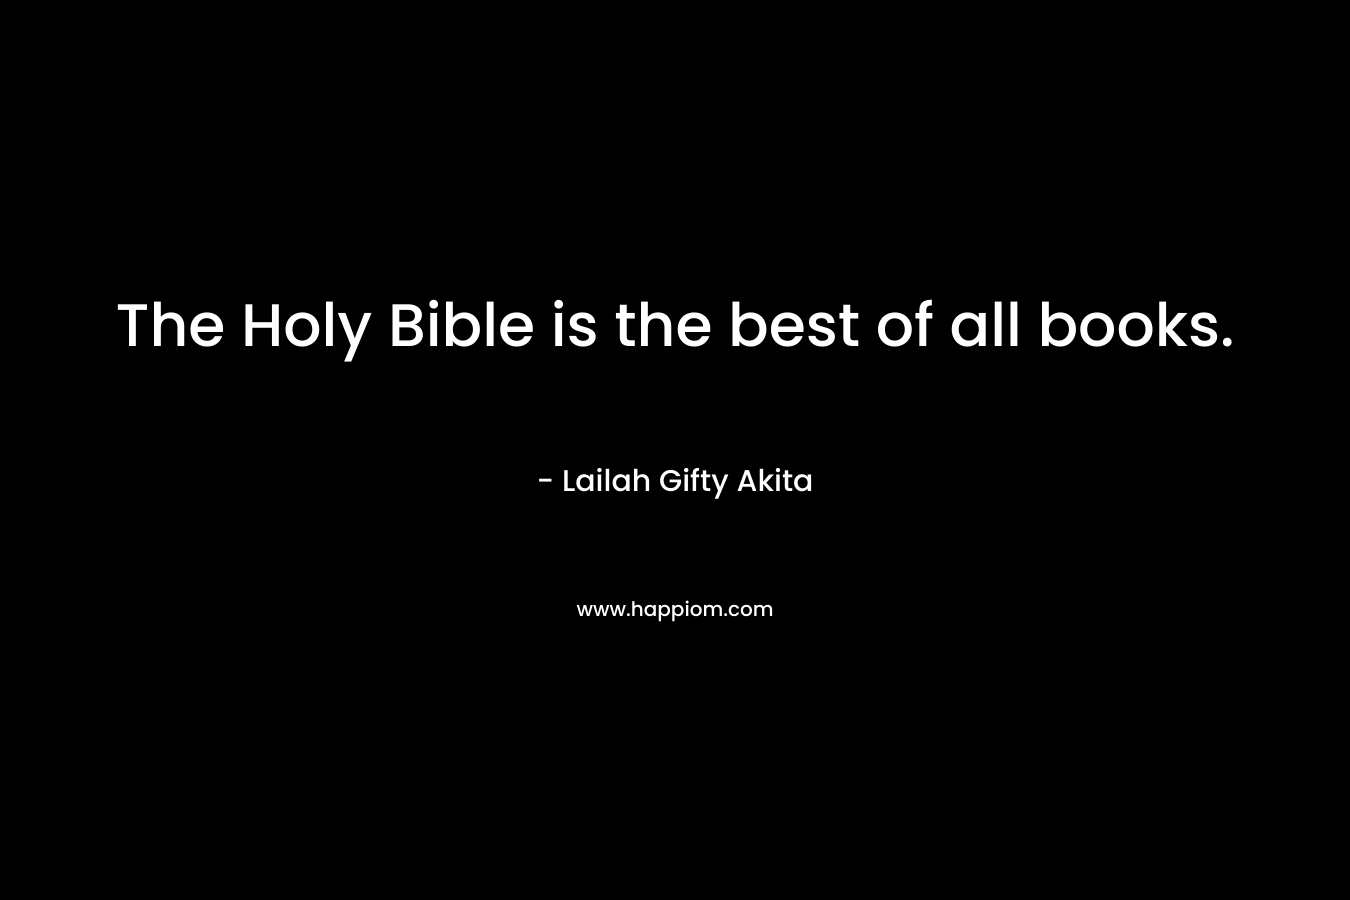 The Holy Bible is the best of all books.